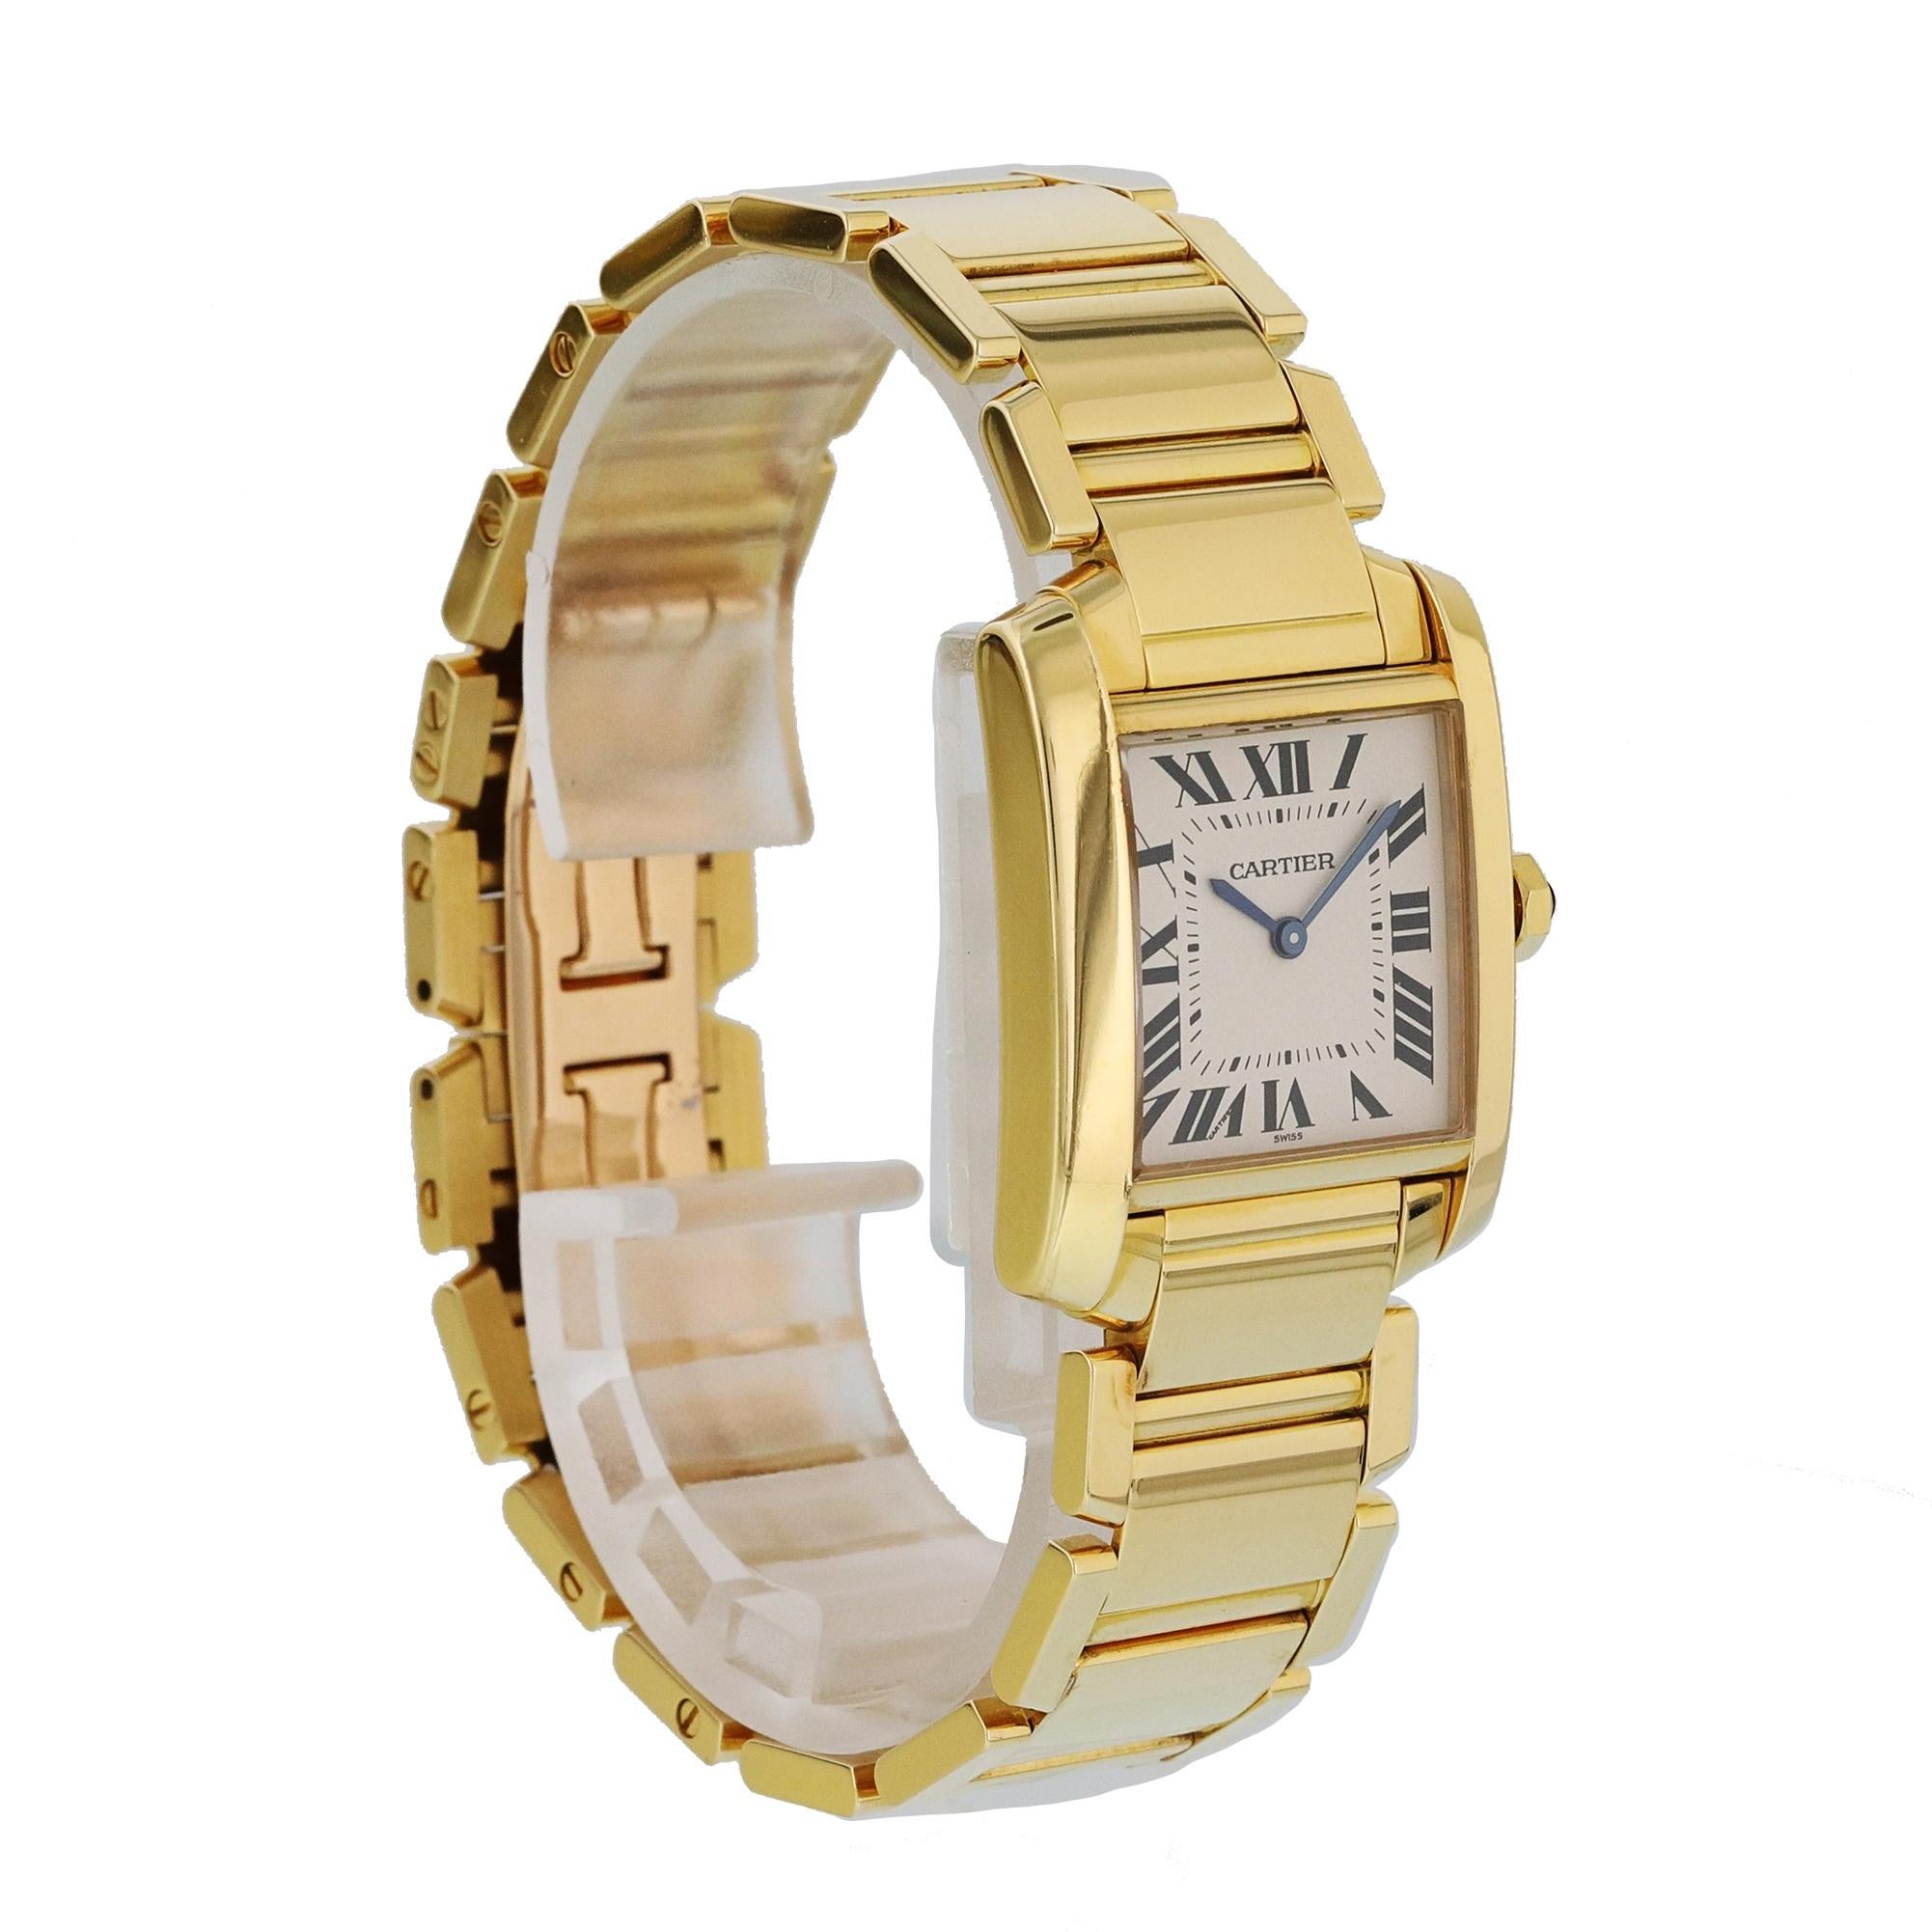 Cartier Tank Francaise 1821 Midsize Ladies Watch In Excellent Condition For Sale In New York, NY